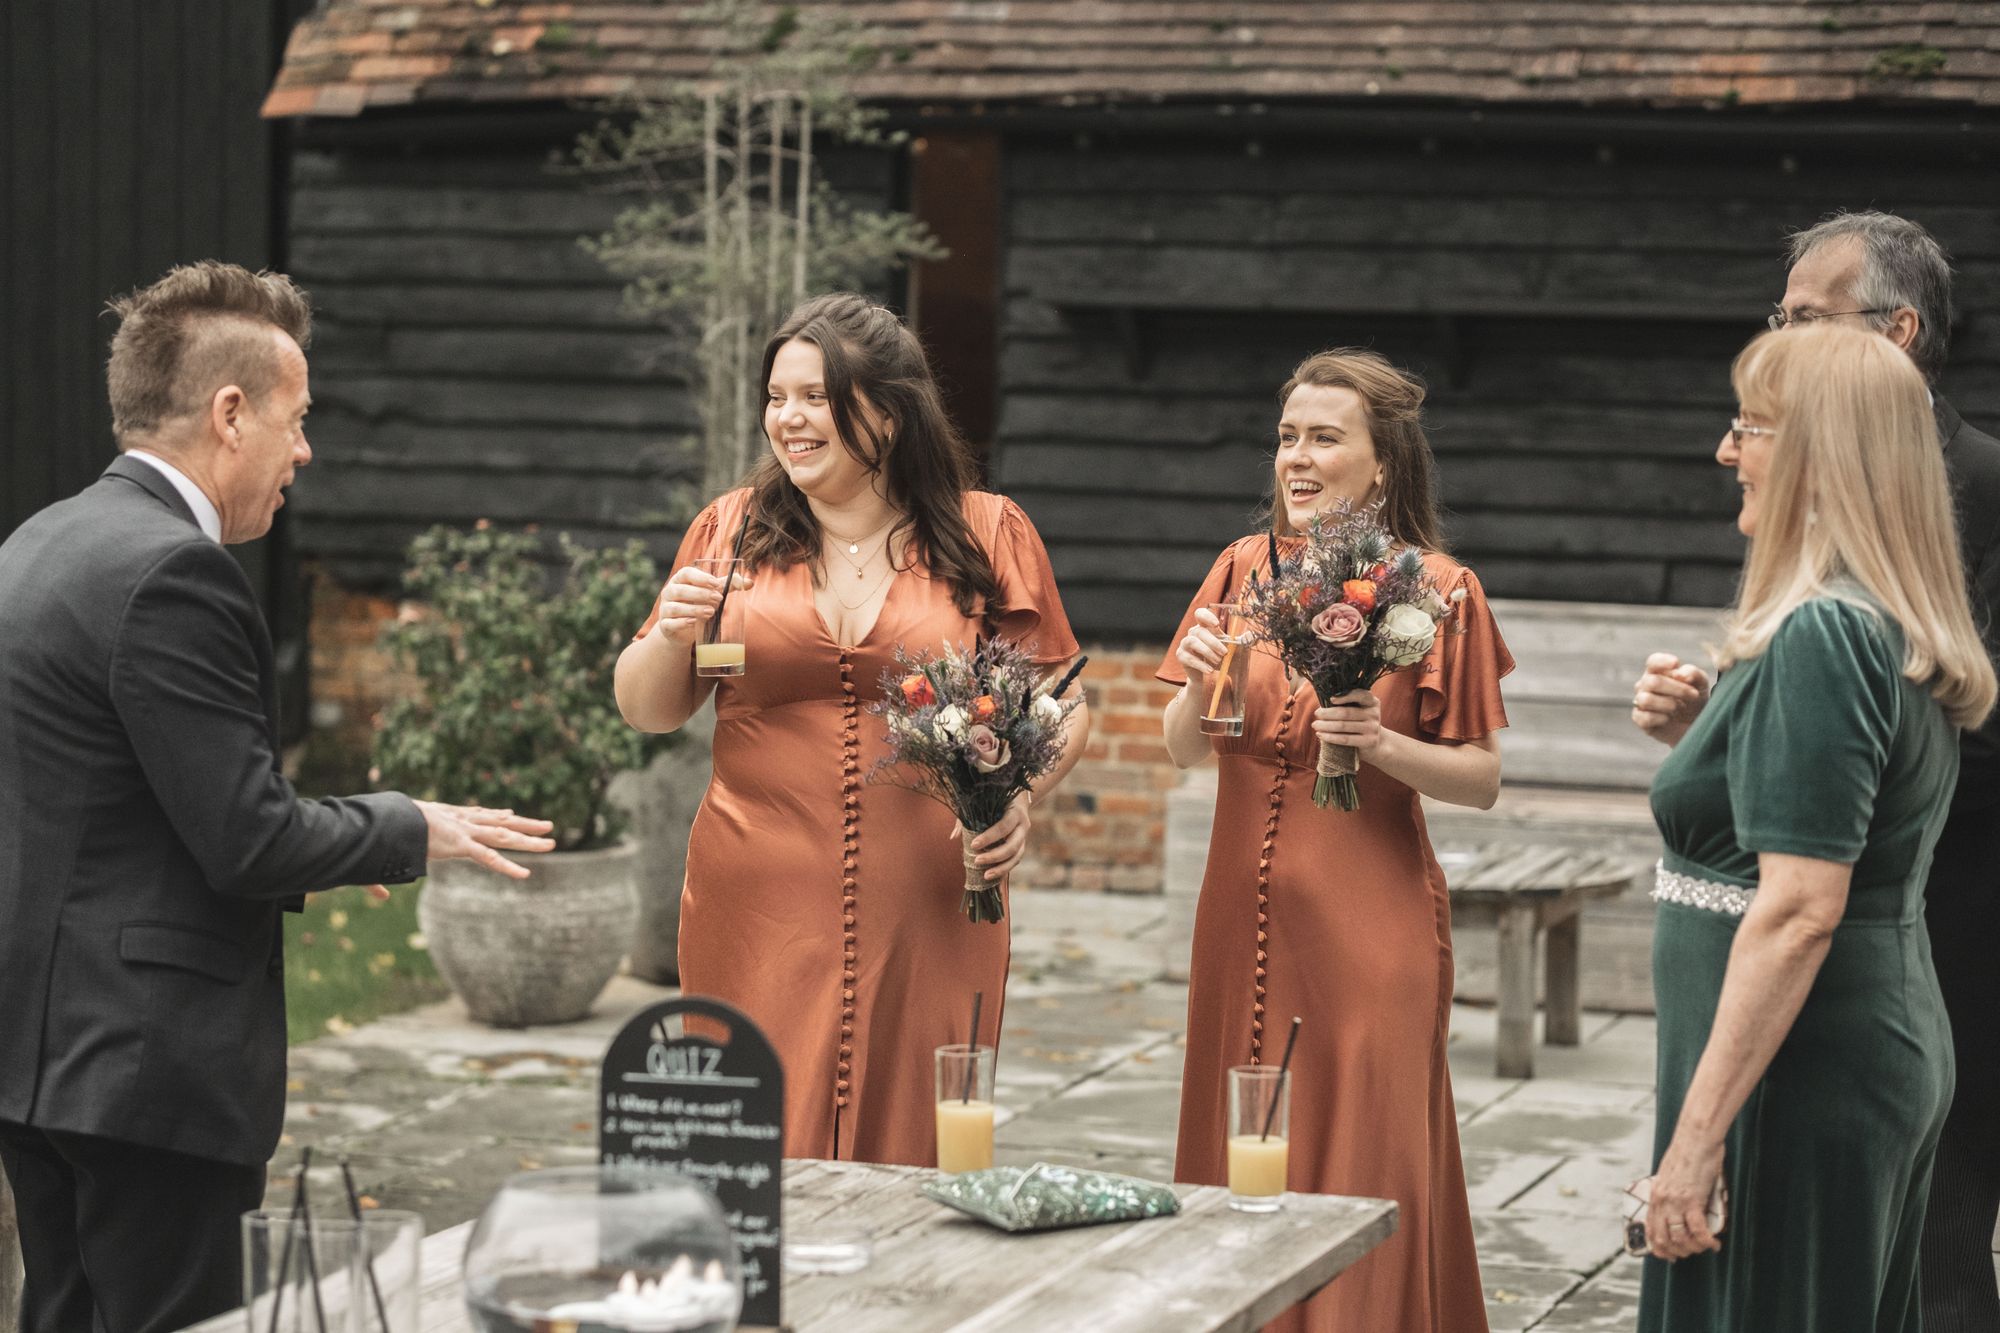 Jennifer's two bridesmaids stood in the courtyard of Lains Barn chatting with guests. Both holding their gorgeous bouquets from Ann Laing and smiling. Photo thanks to The Falkenburgs via Big Day Productions